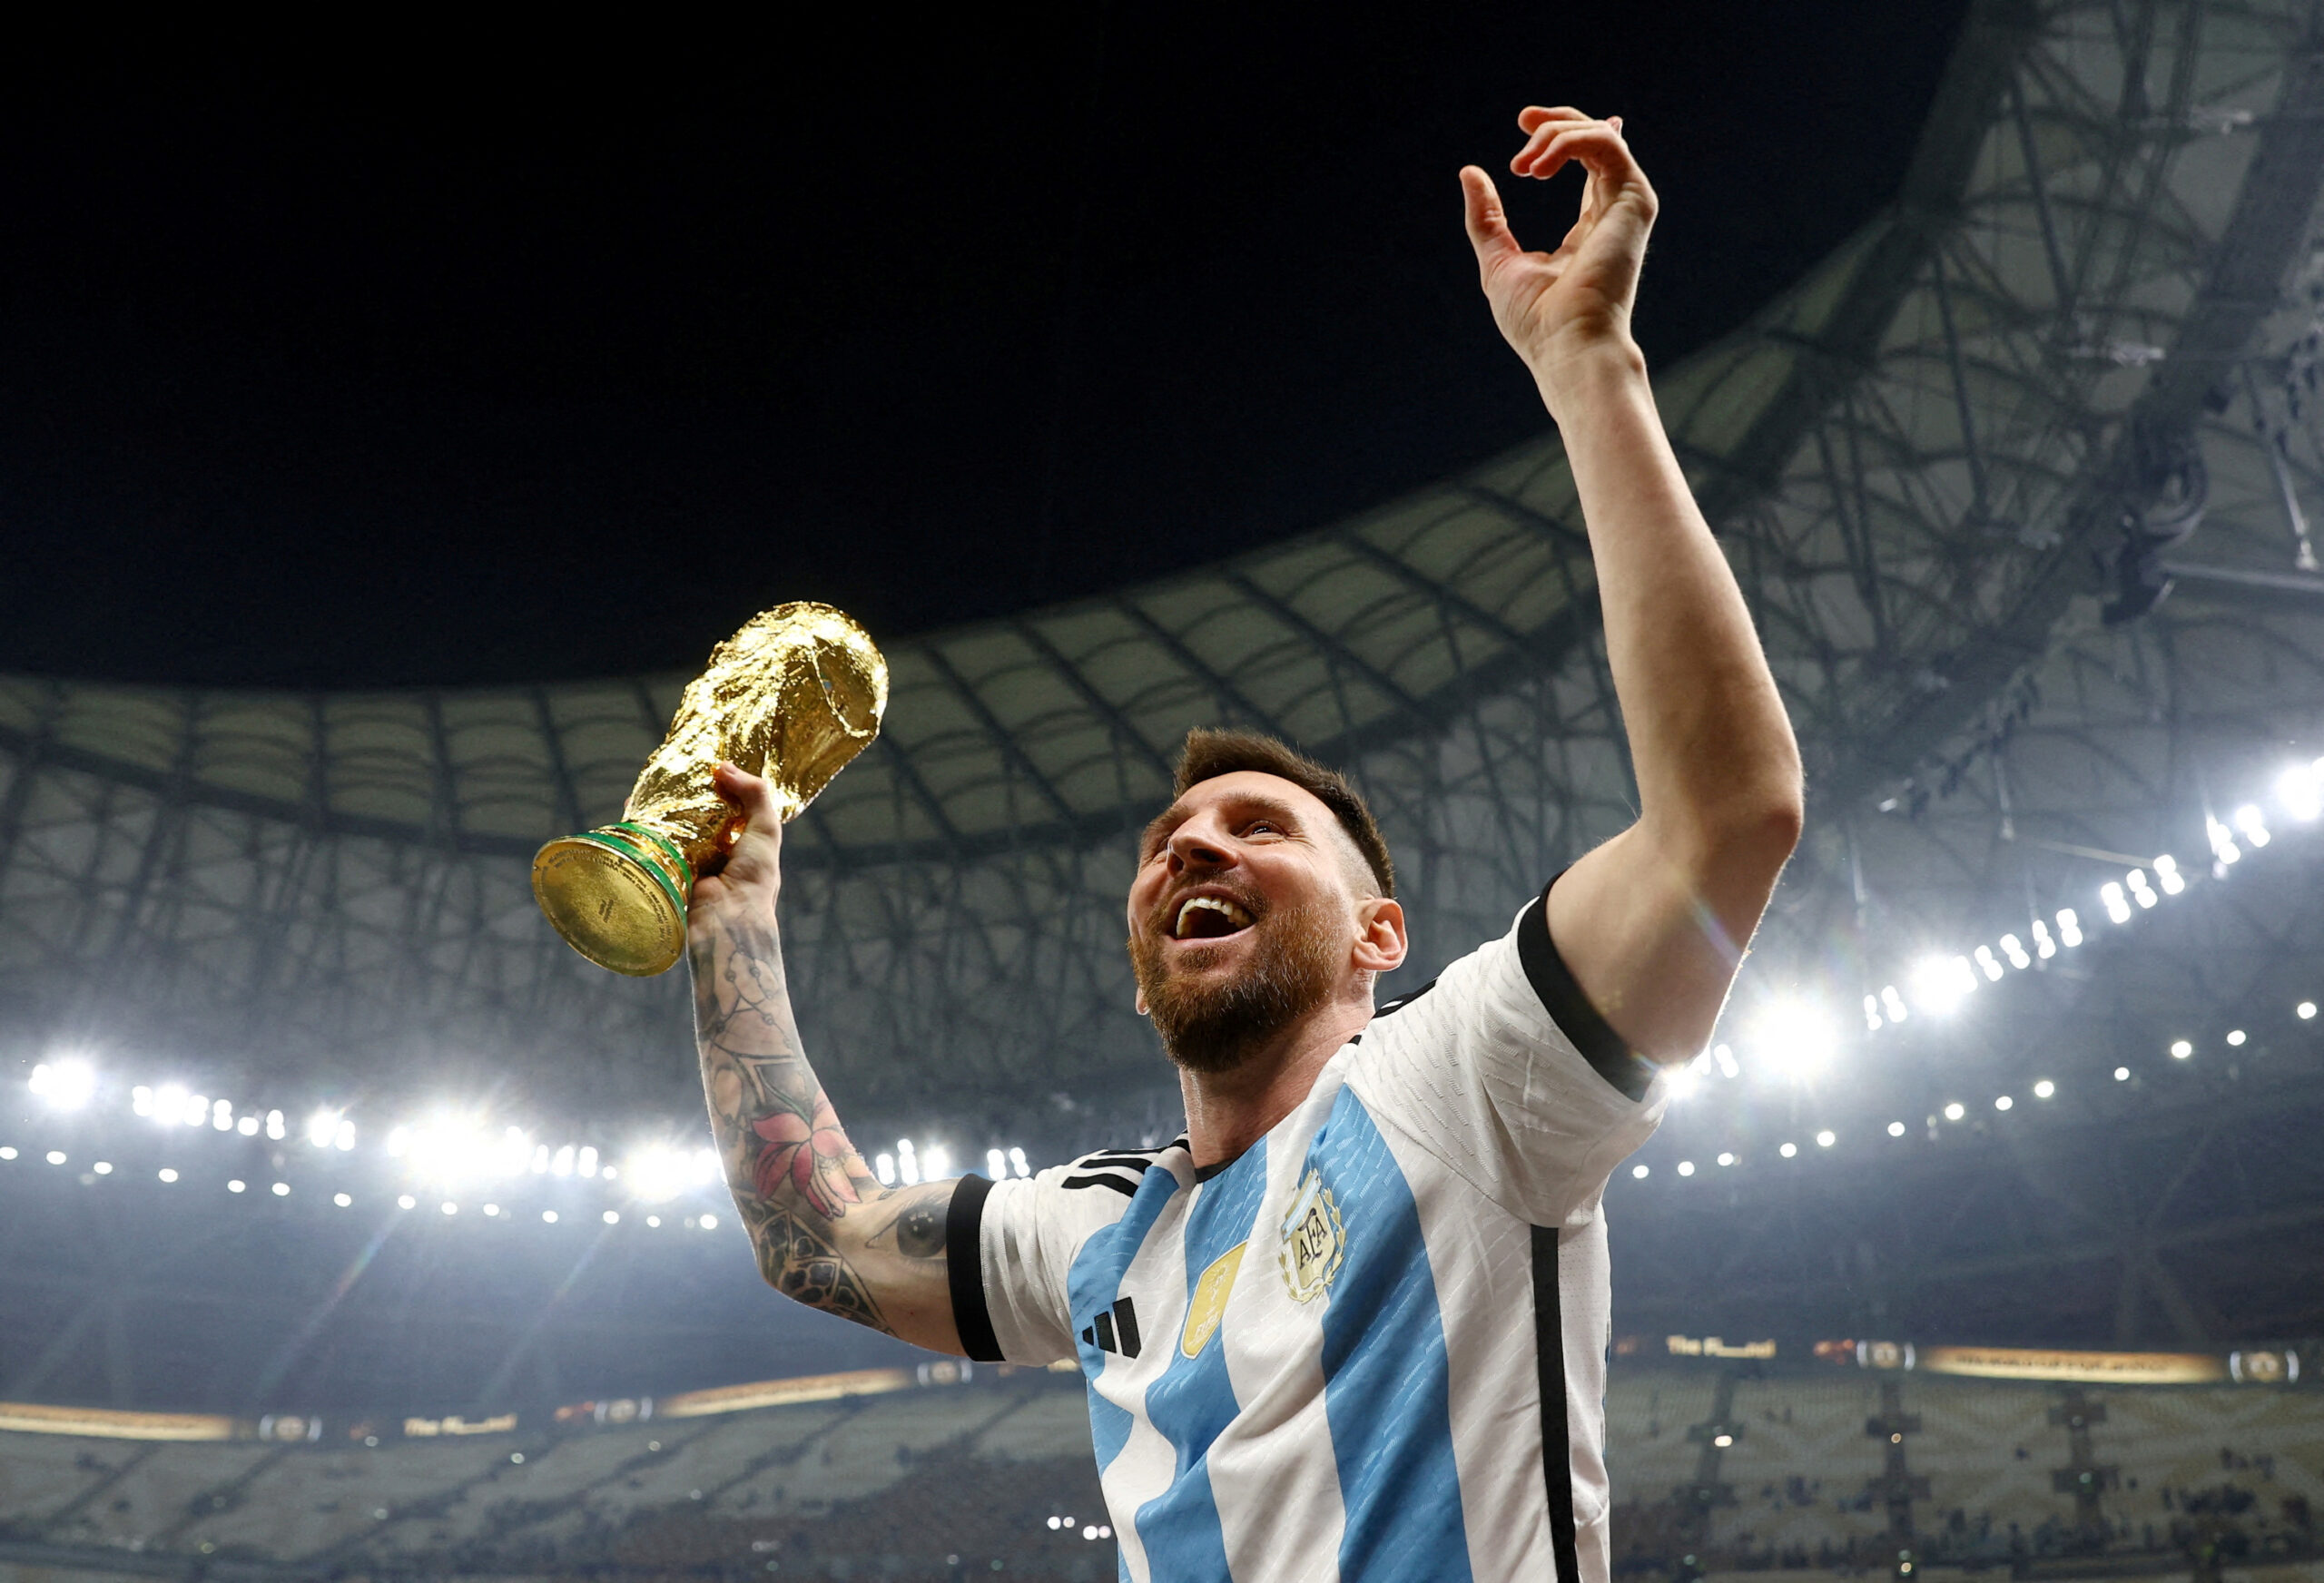 Official Argentina 2022 World Cup film to hit theaters in December